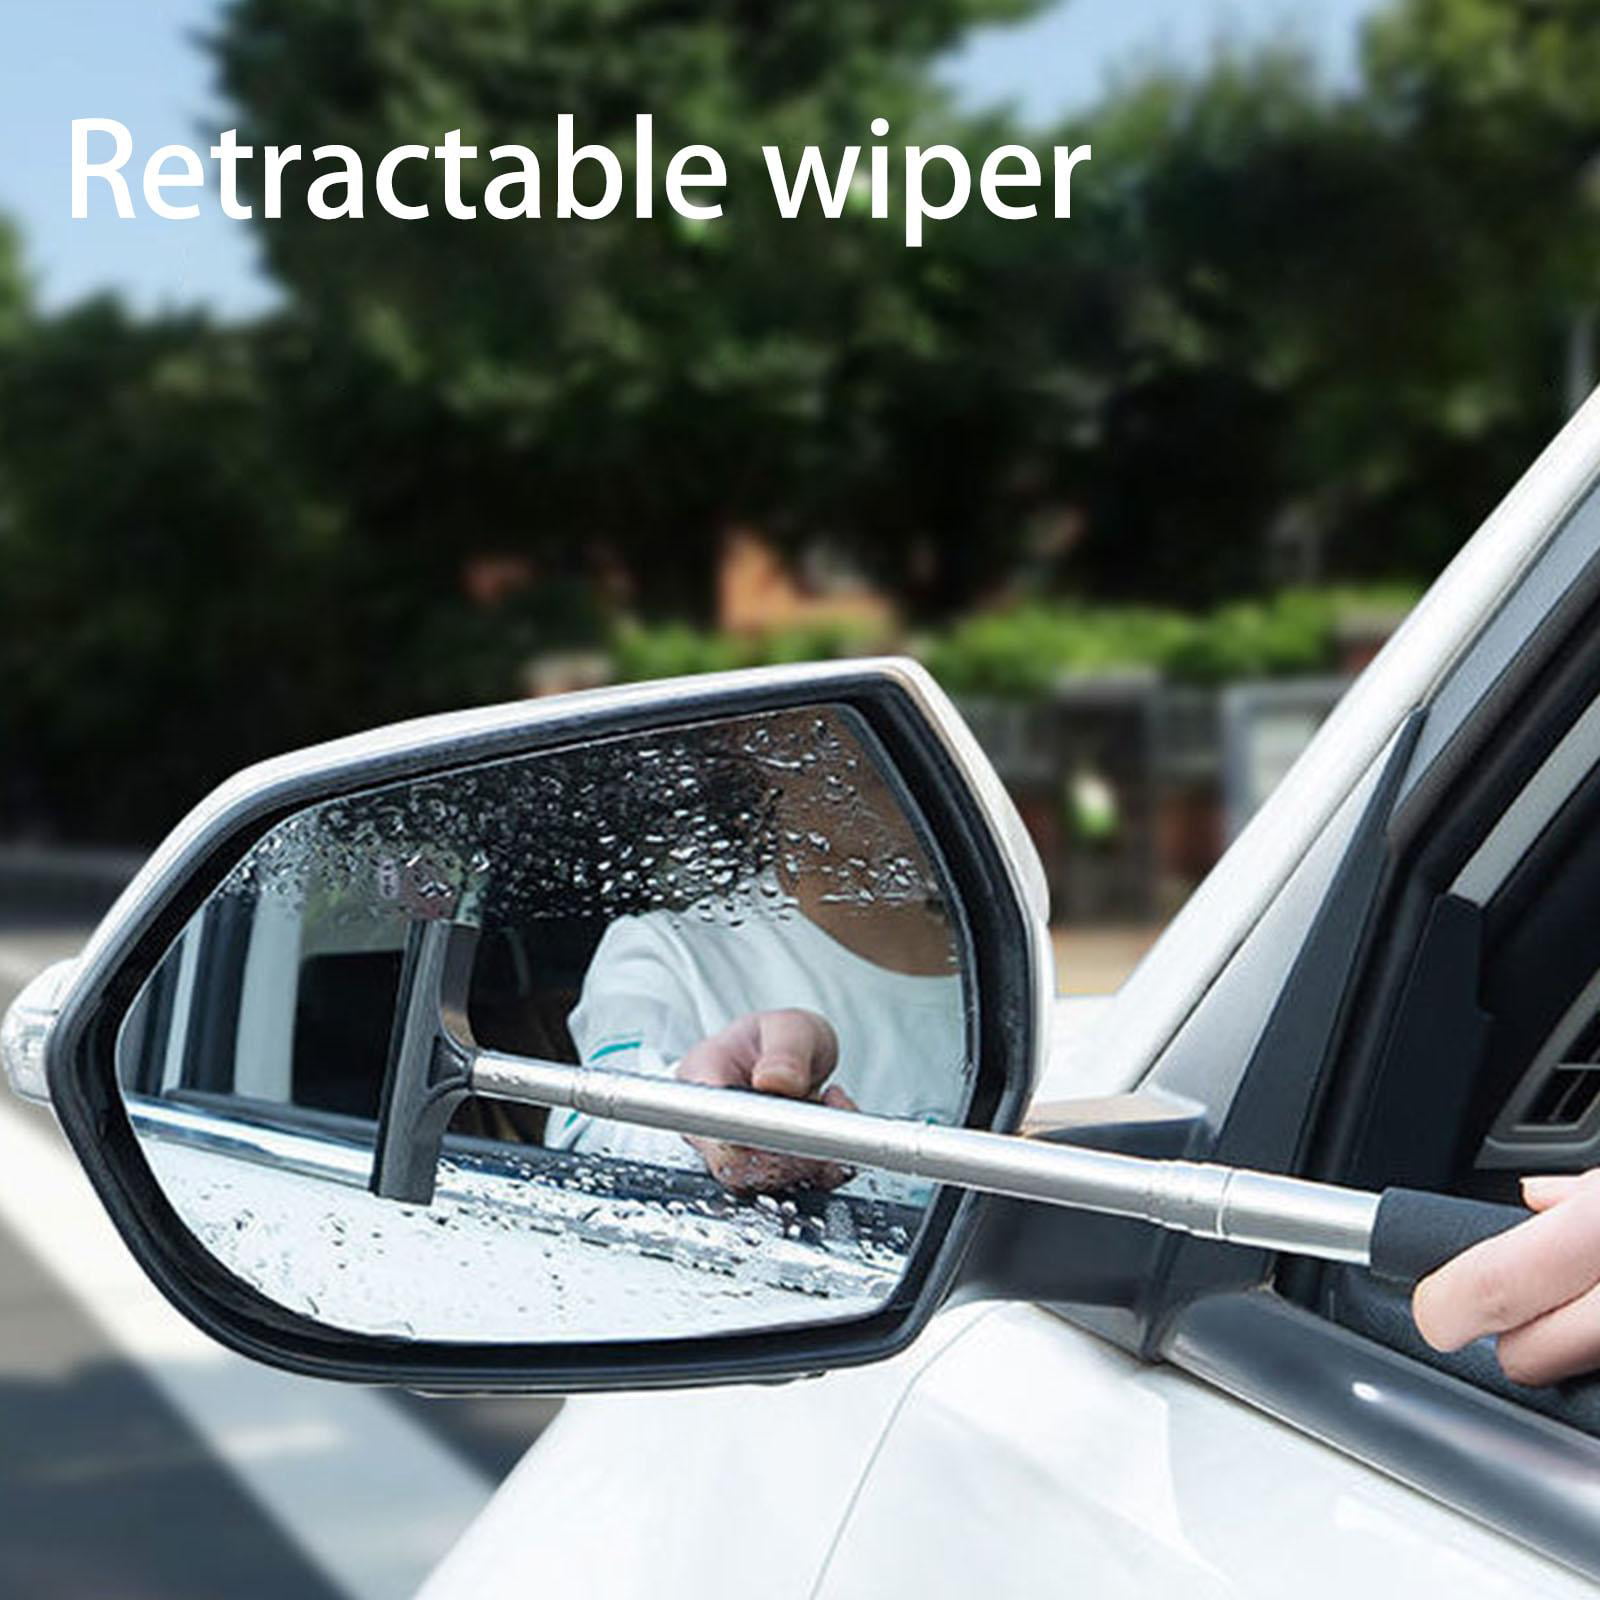  Car Rearview Mirror Wiper Adjustable Telescopic  Rod(8-38.6),Multi-Use Squeegee Water Wiper Cleaner Tool for Car Mirror /Winshield/Shower/Car Glass Exterior Accessories (Black) : Automotive